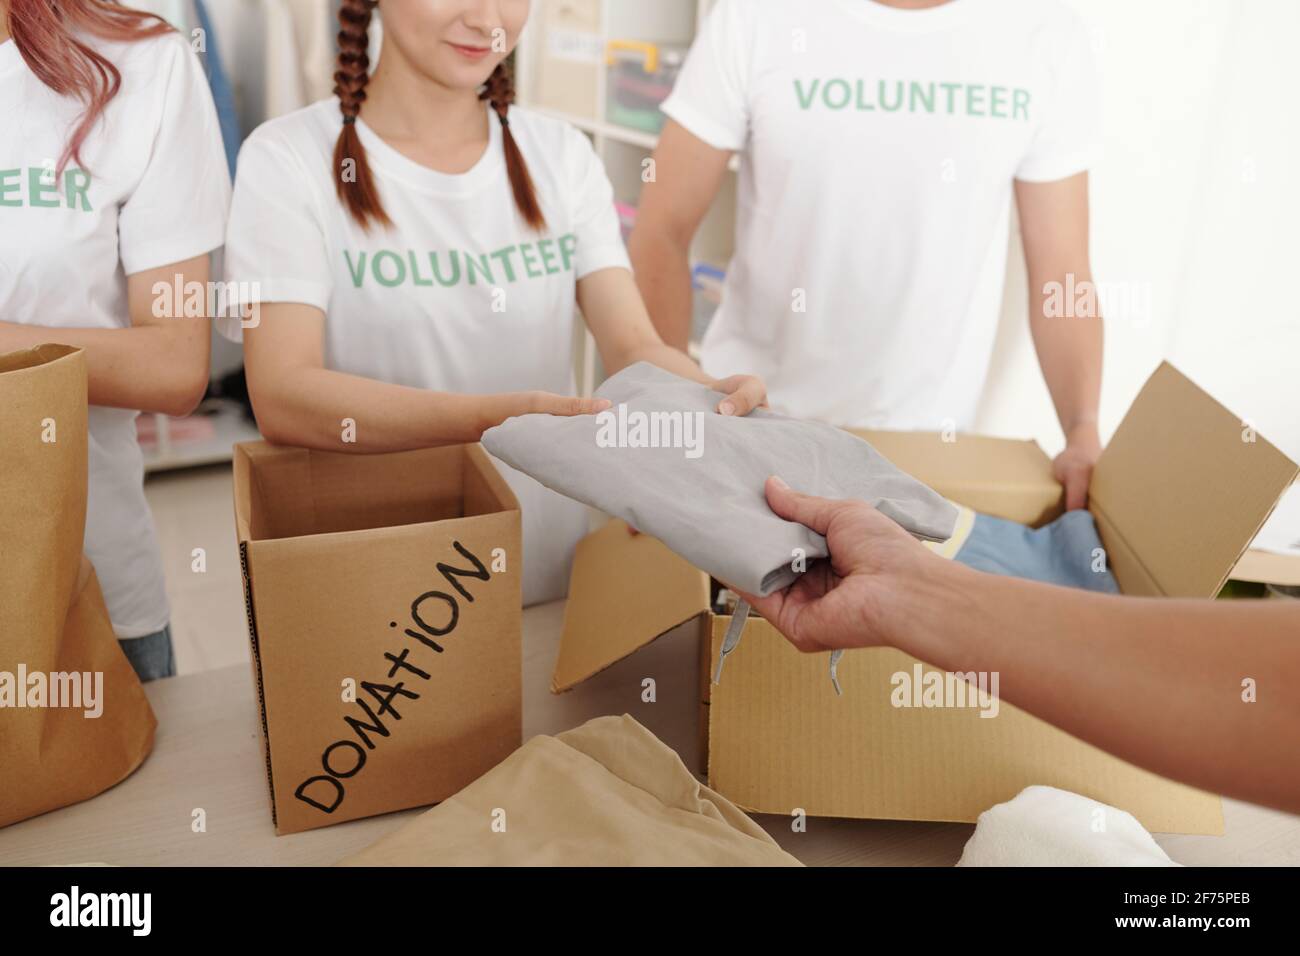 Close-up image of volunteers packing clean clothes for people in need into cardboard donation boxes Stock Photo